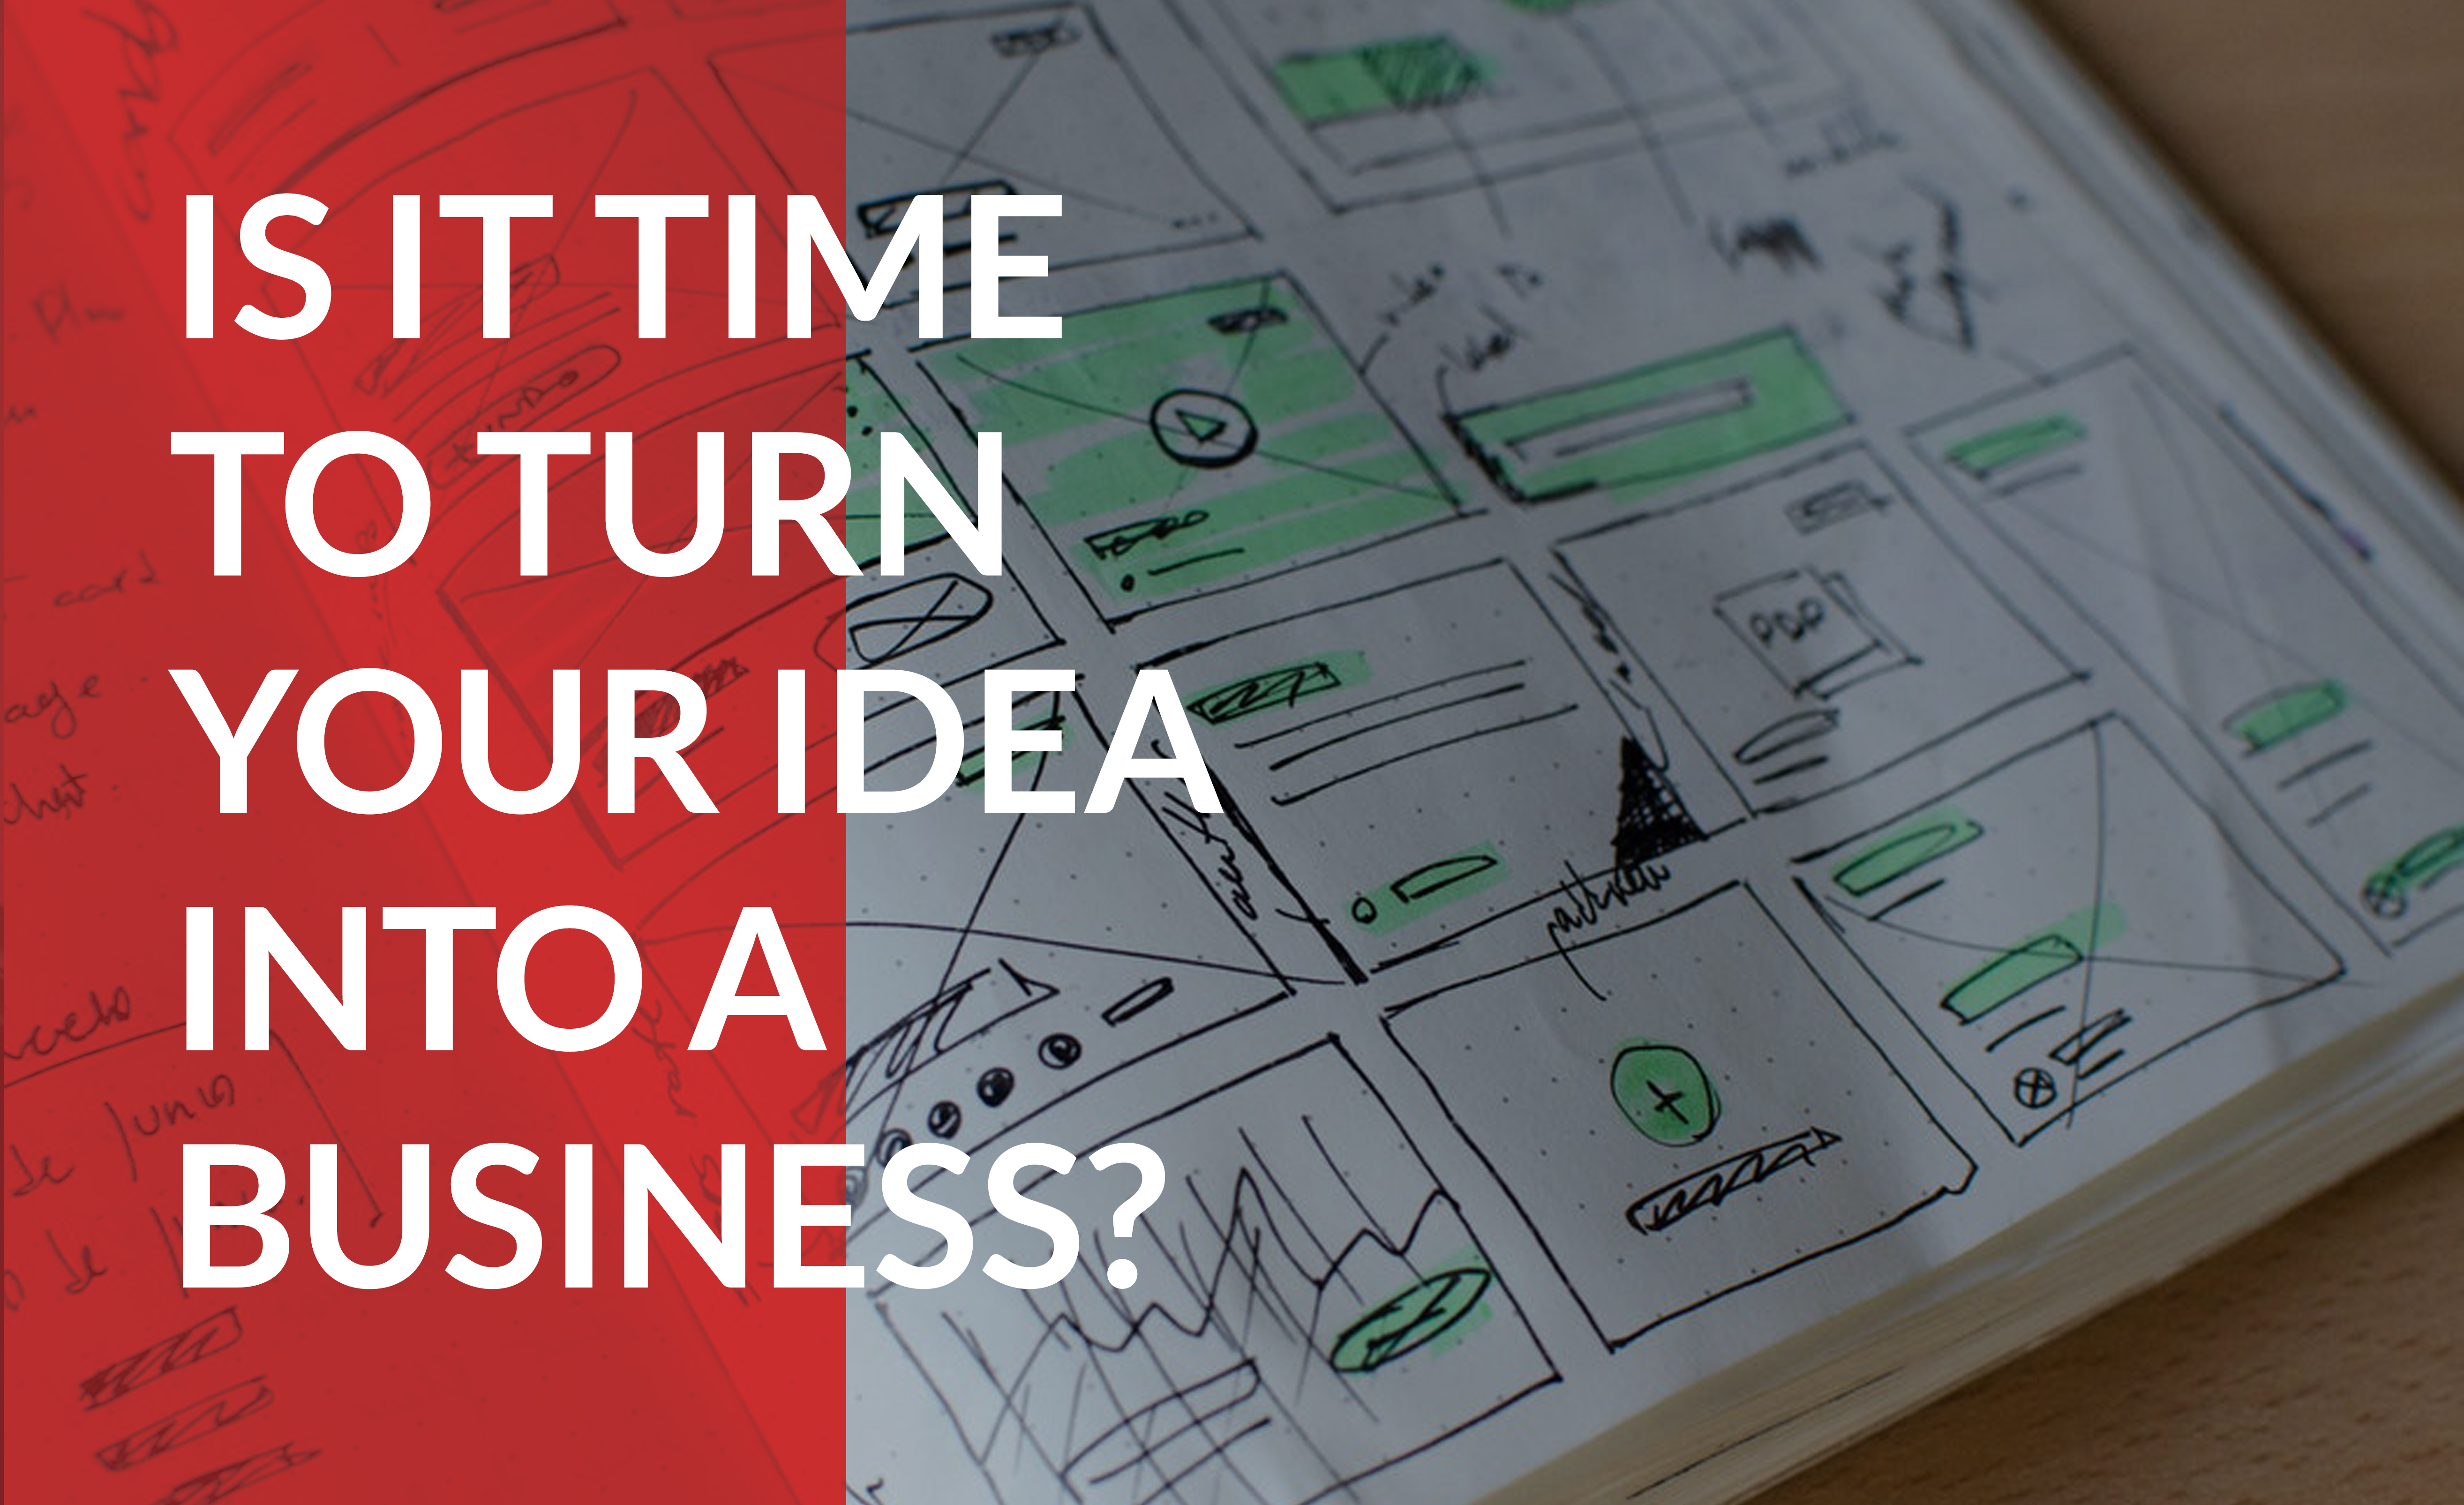 Ask yourself these questions before turning your idea into a business.